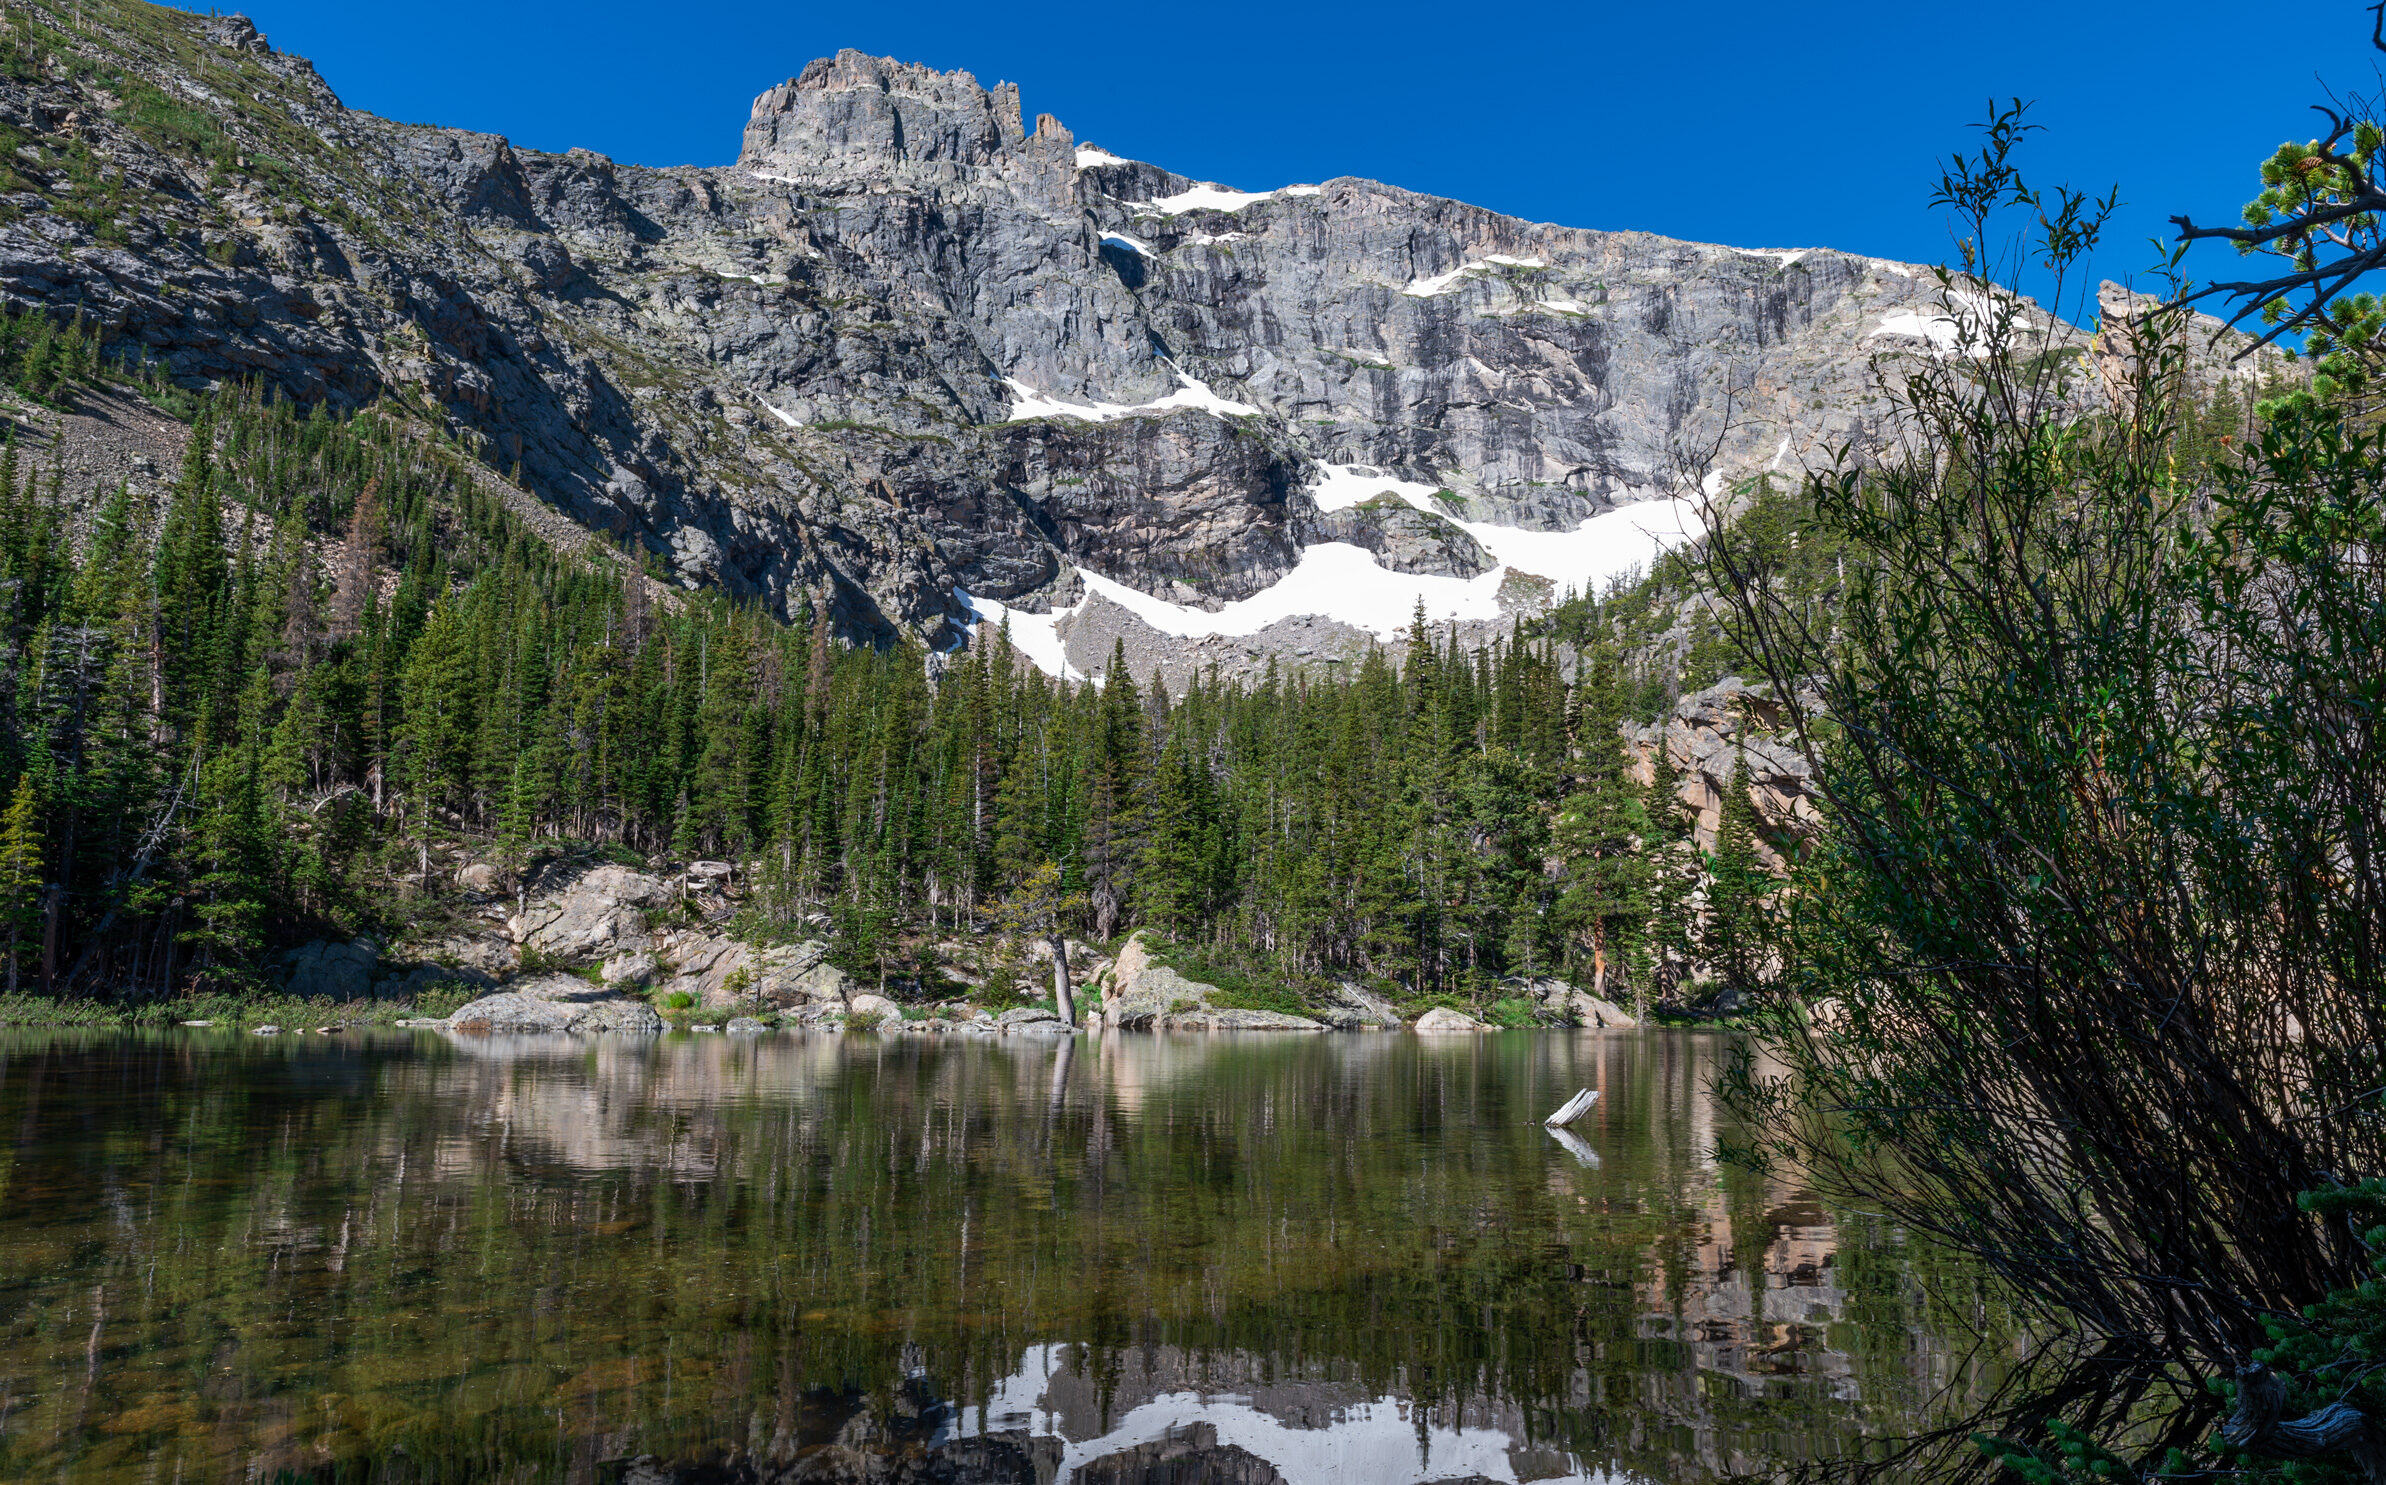 Loomis Lake, (10,240') an alpine lake in Rocky Mountain National Park, Colorado, that is often less visited.